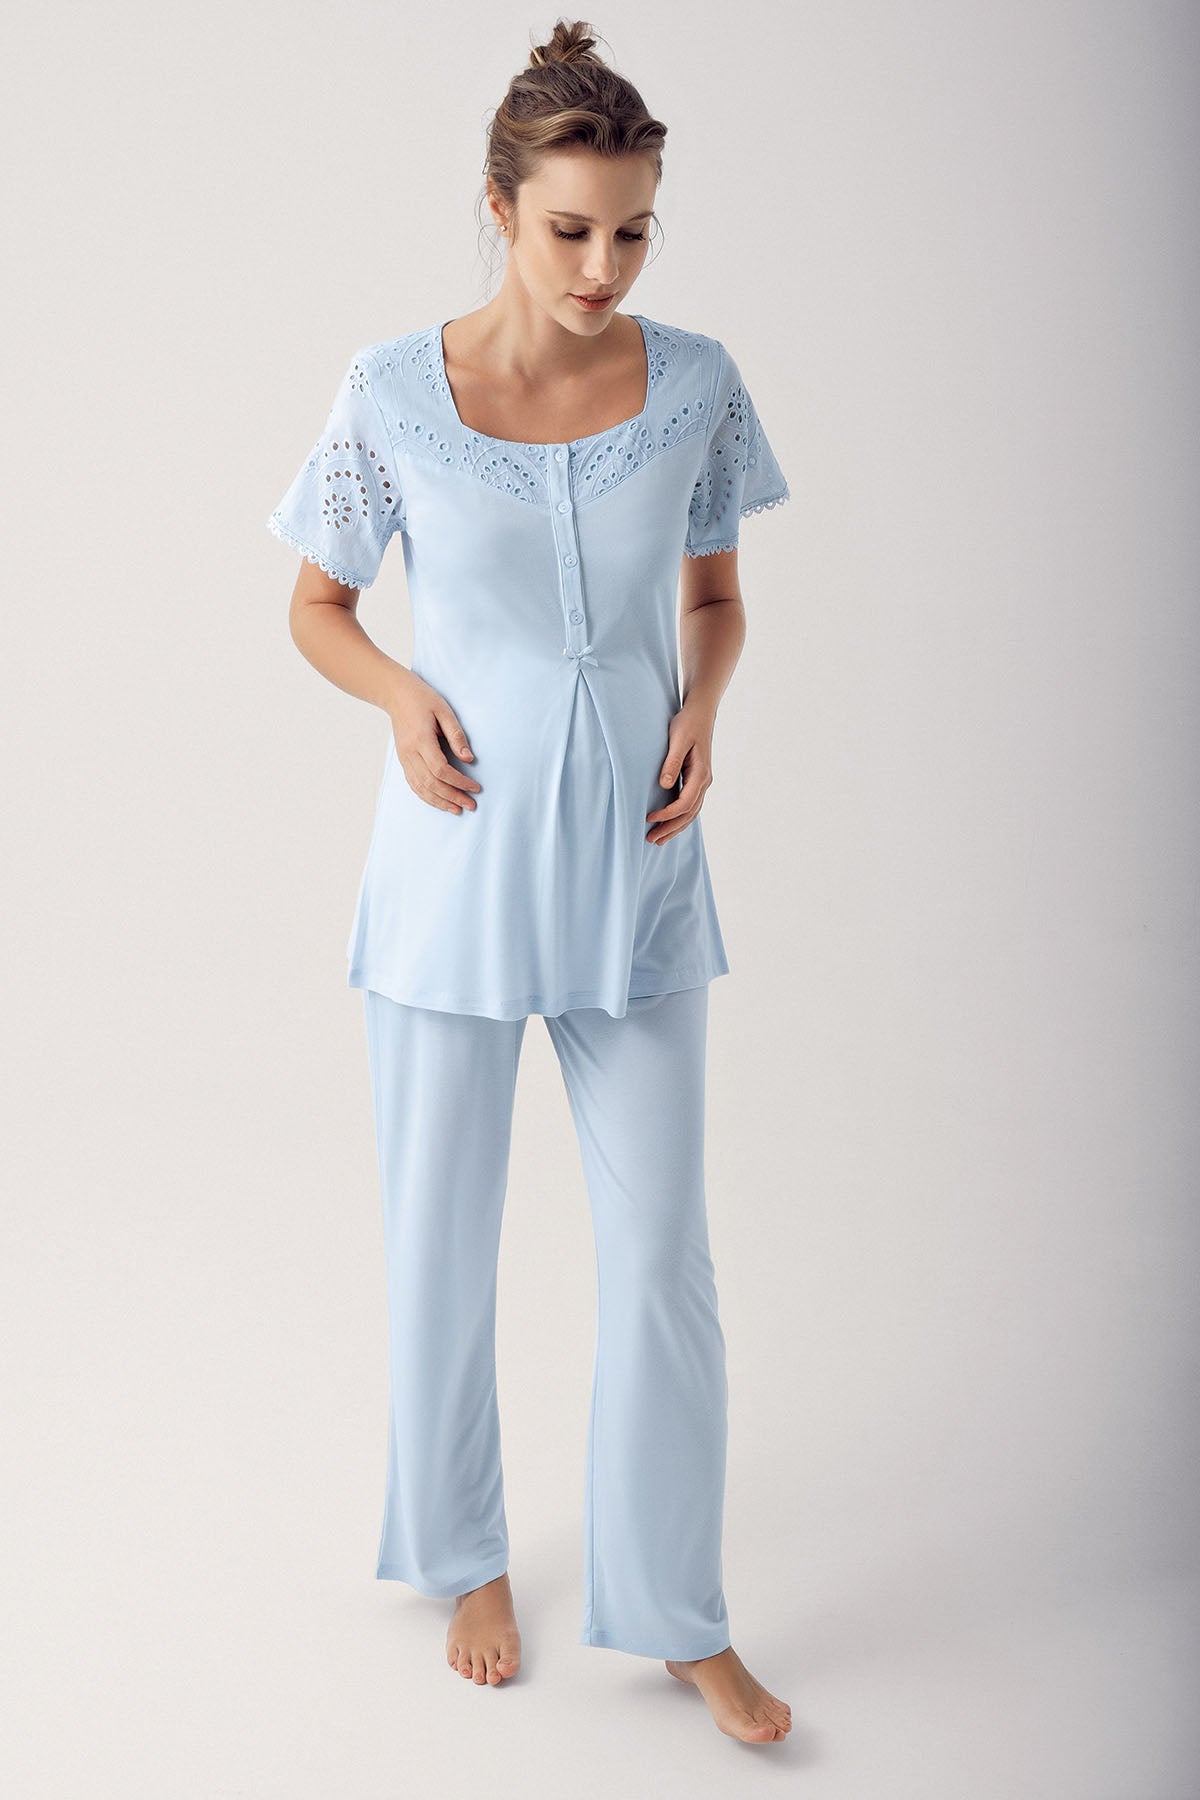 Shopymommy 12305 Motif Embroidered 3-Pieces Maternity & Nursing Pajamas With Robe Blue